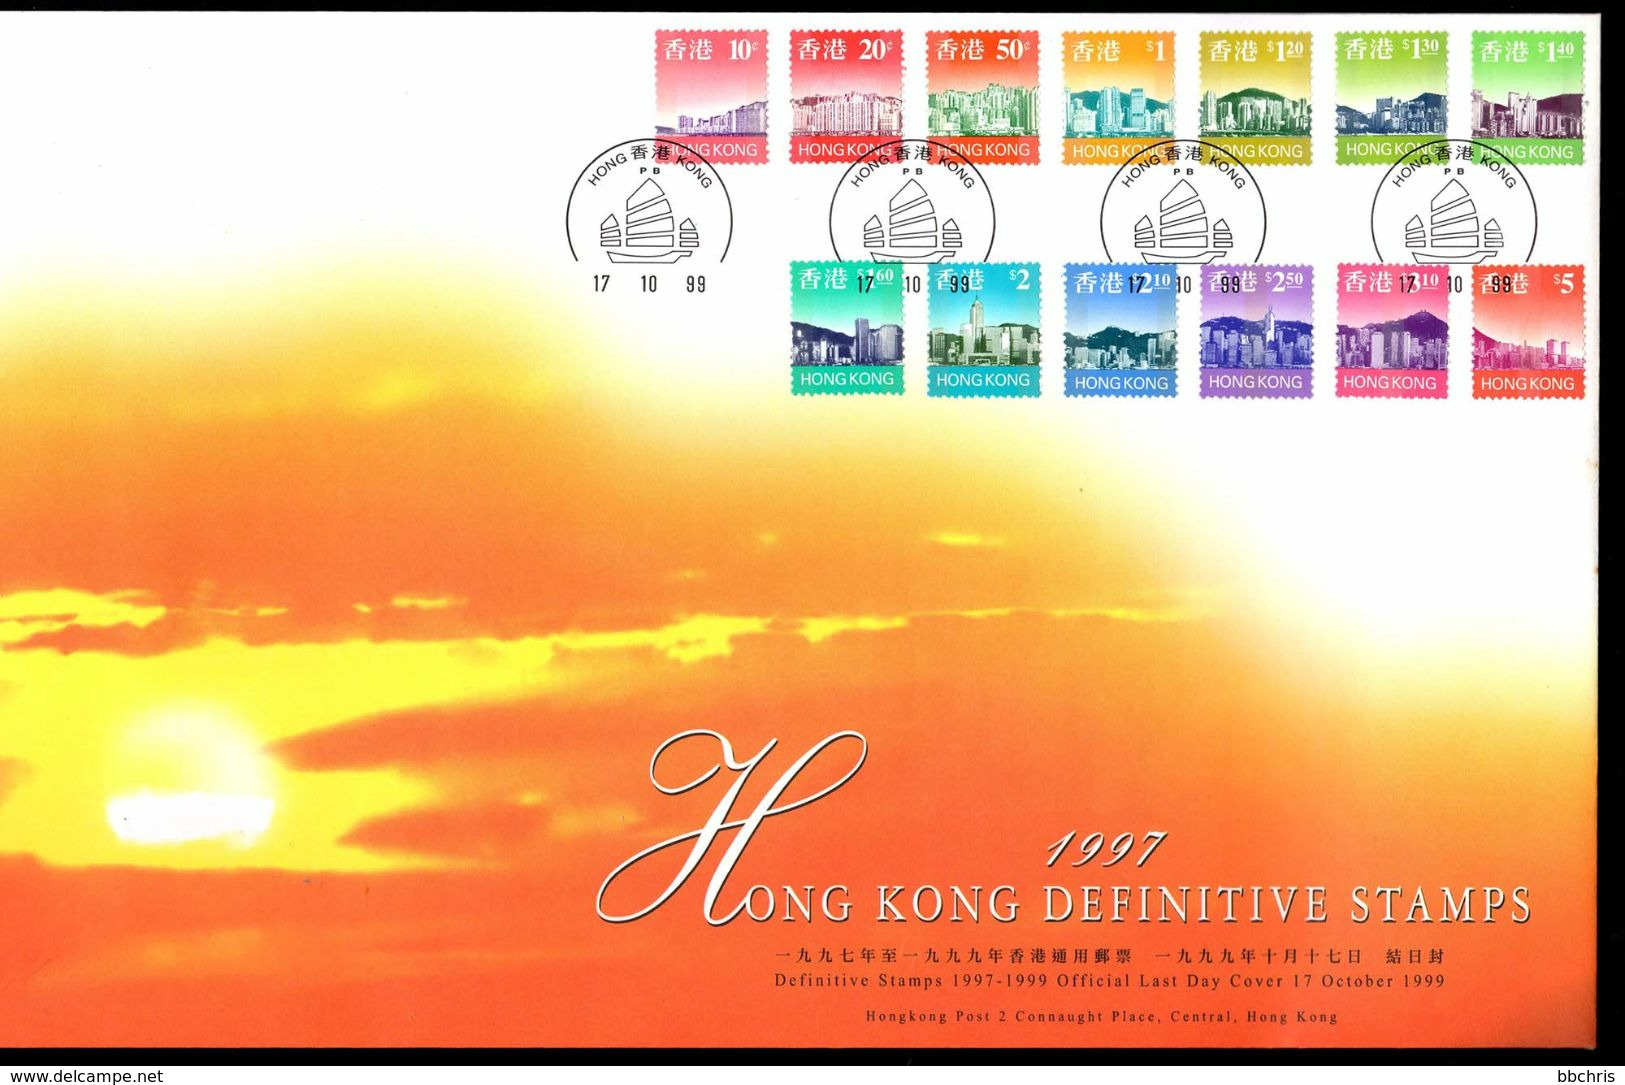 Last Day Cover 1999 Hong Kong Definitive Stamps 1997 - 1999 Low Values JUNK Postmark - FDC